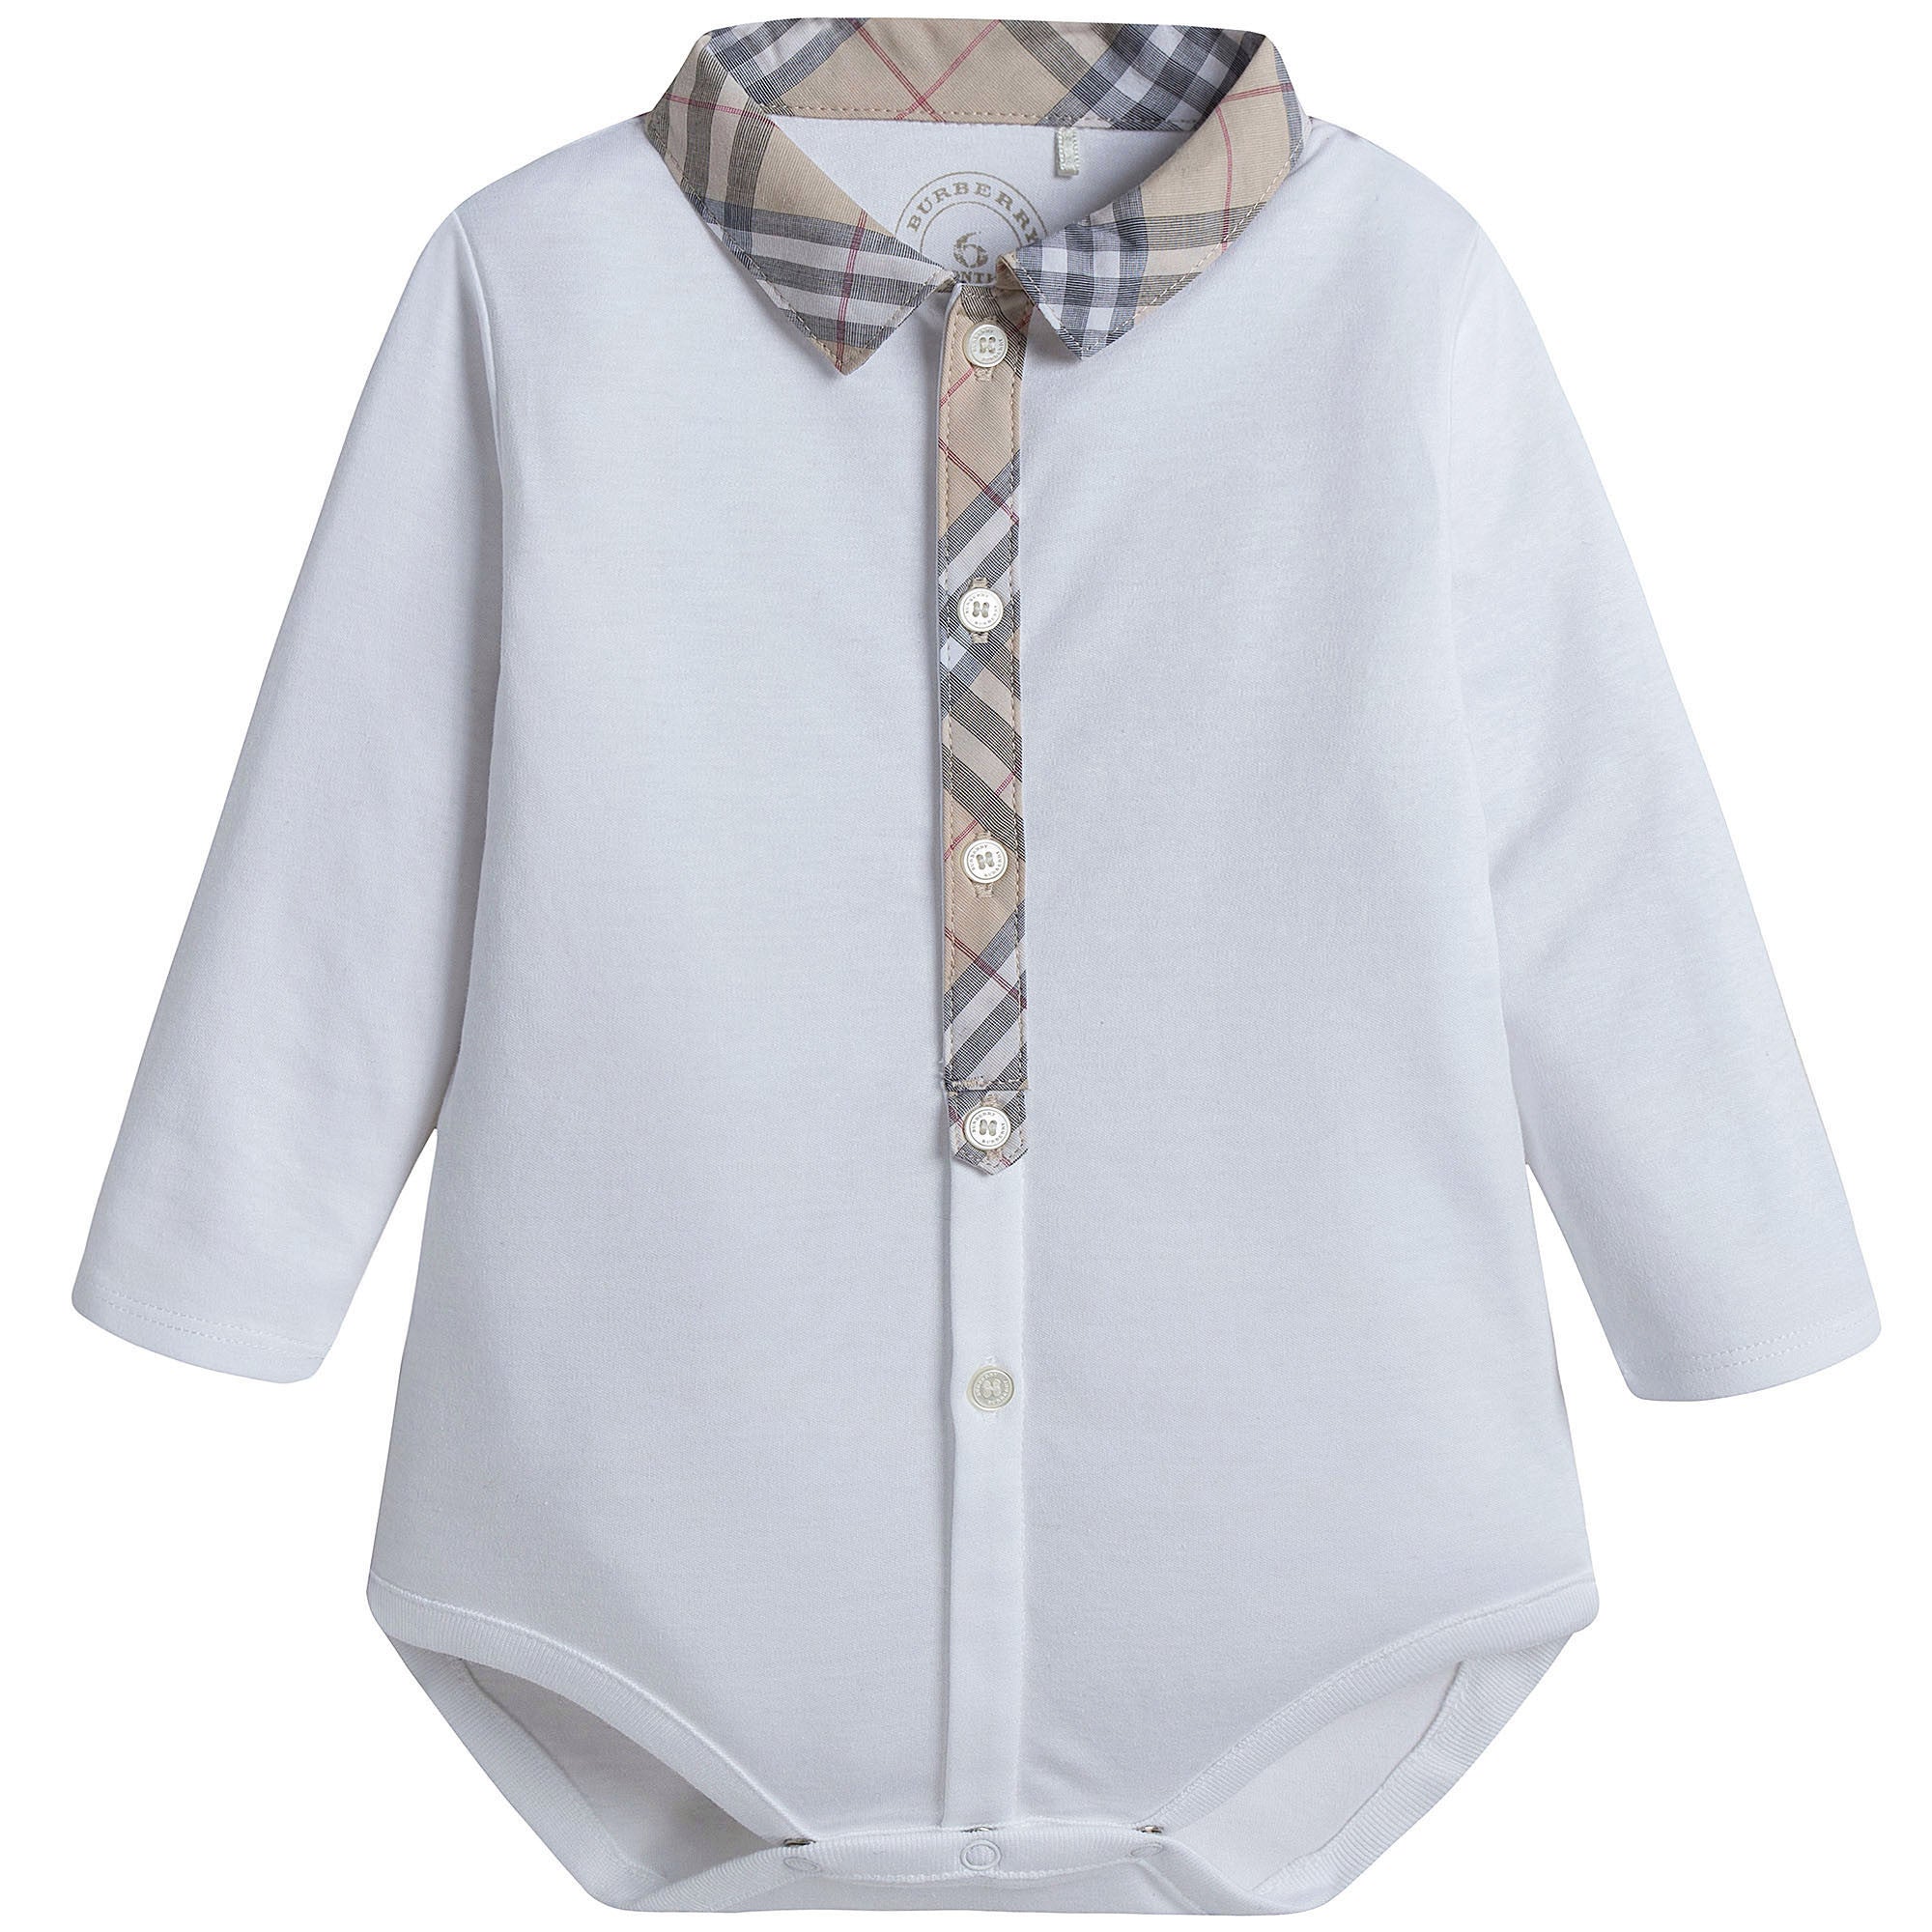 Baby Boys&Baby Girls White With Check Collar Babysuits - CÉMAROSE | Children's Fashion Store - 1